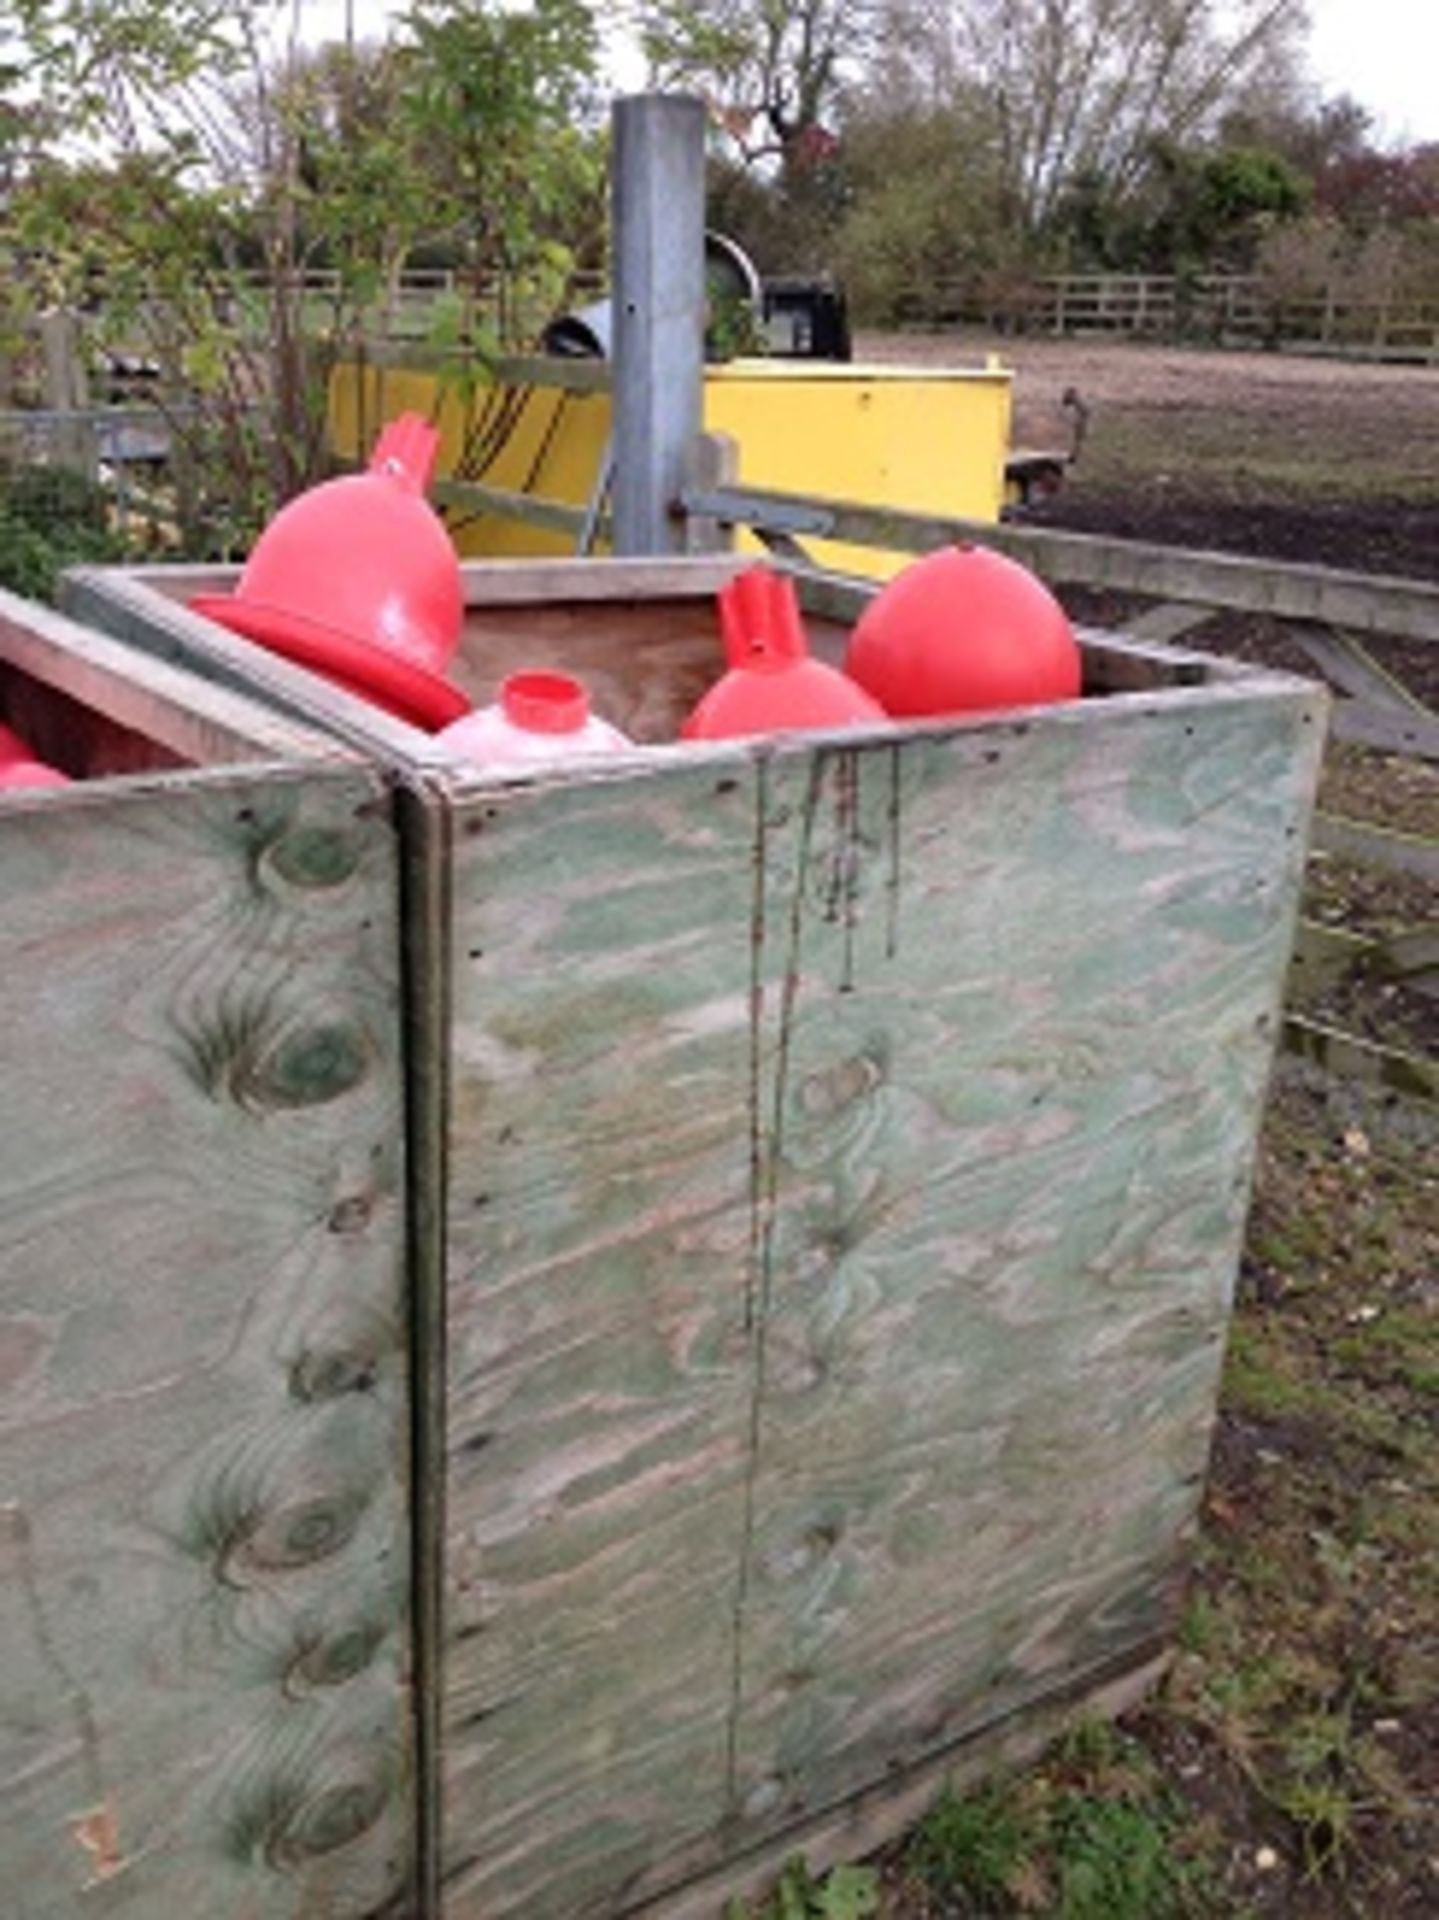 APPROX 300 AUTOMATIC CHICKEN FEEDERS & DRINKERS - 20 FT BOX LORRY REQUIRED TO MOVE!! - Image 7 of 10